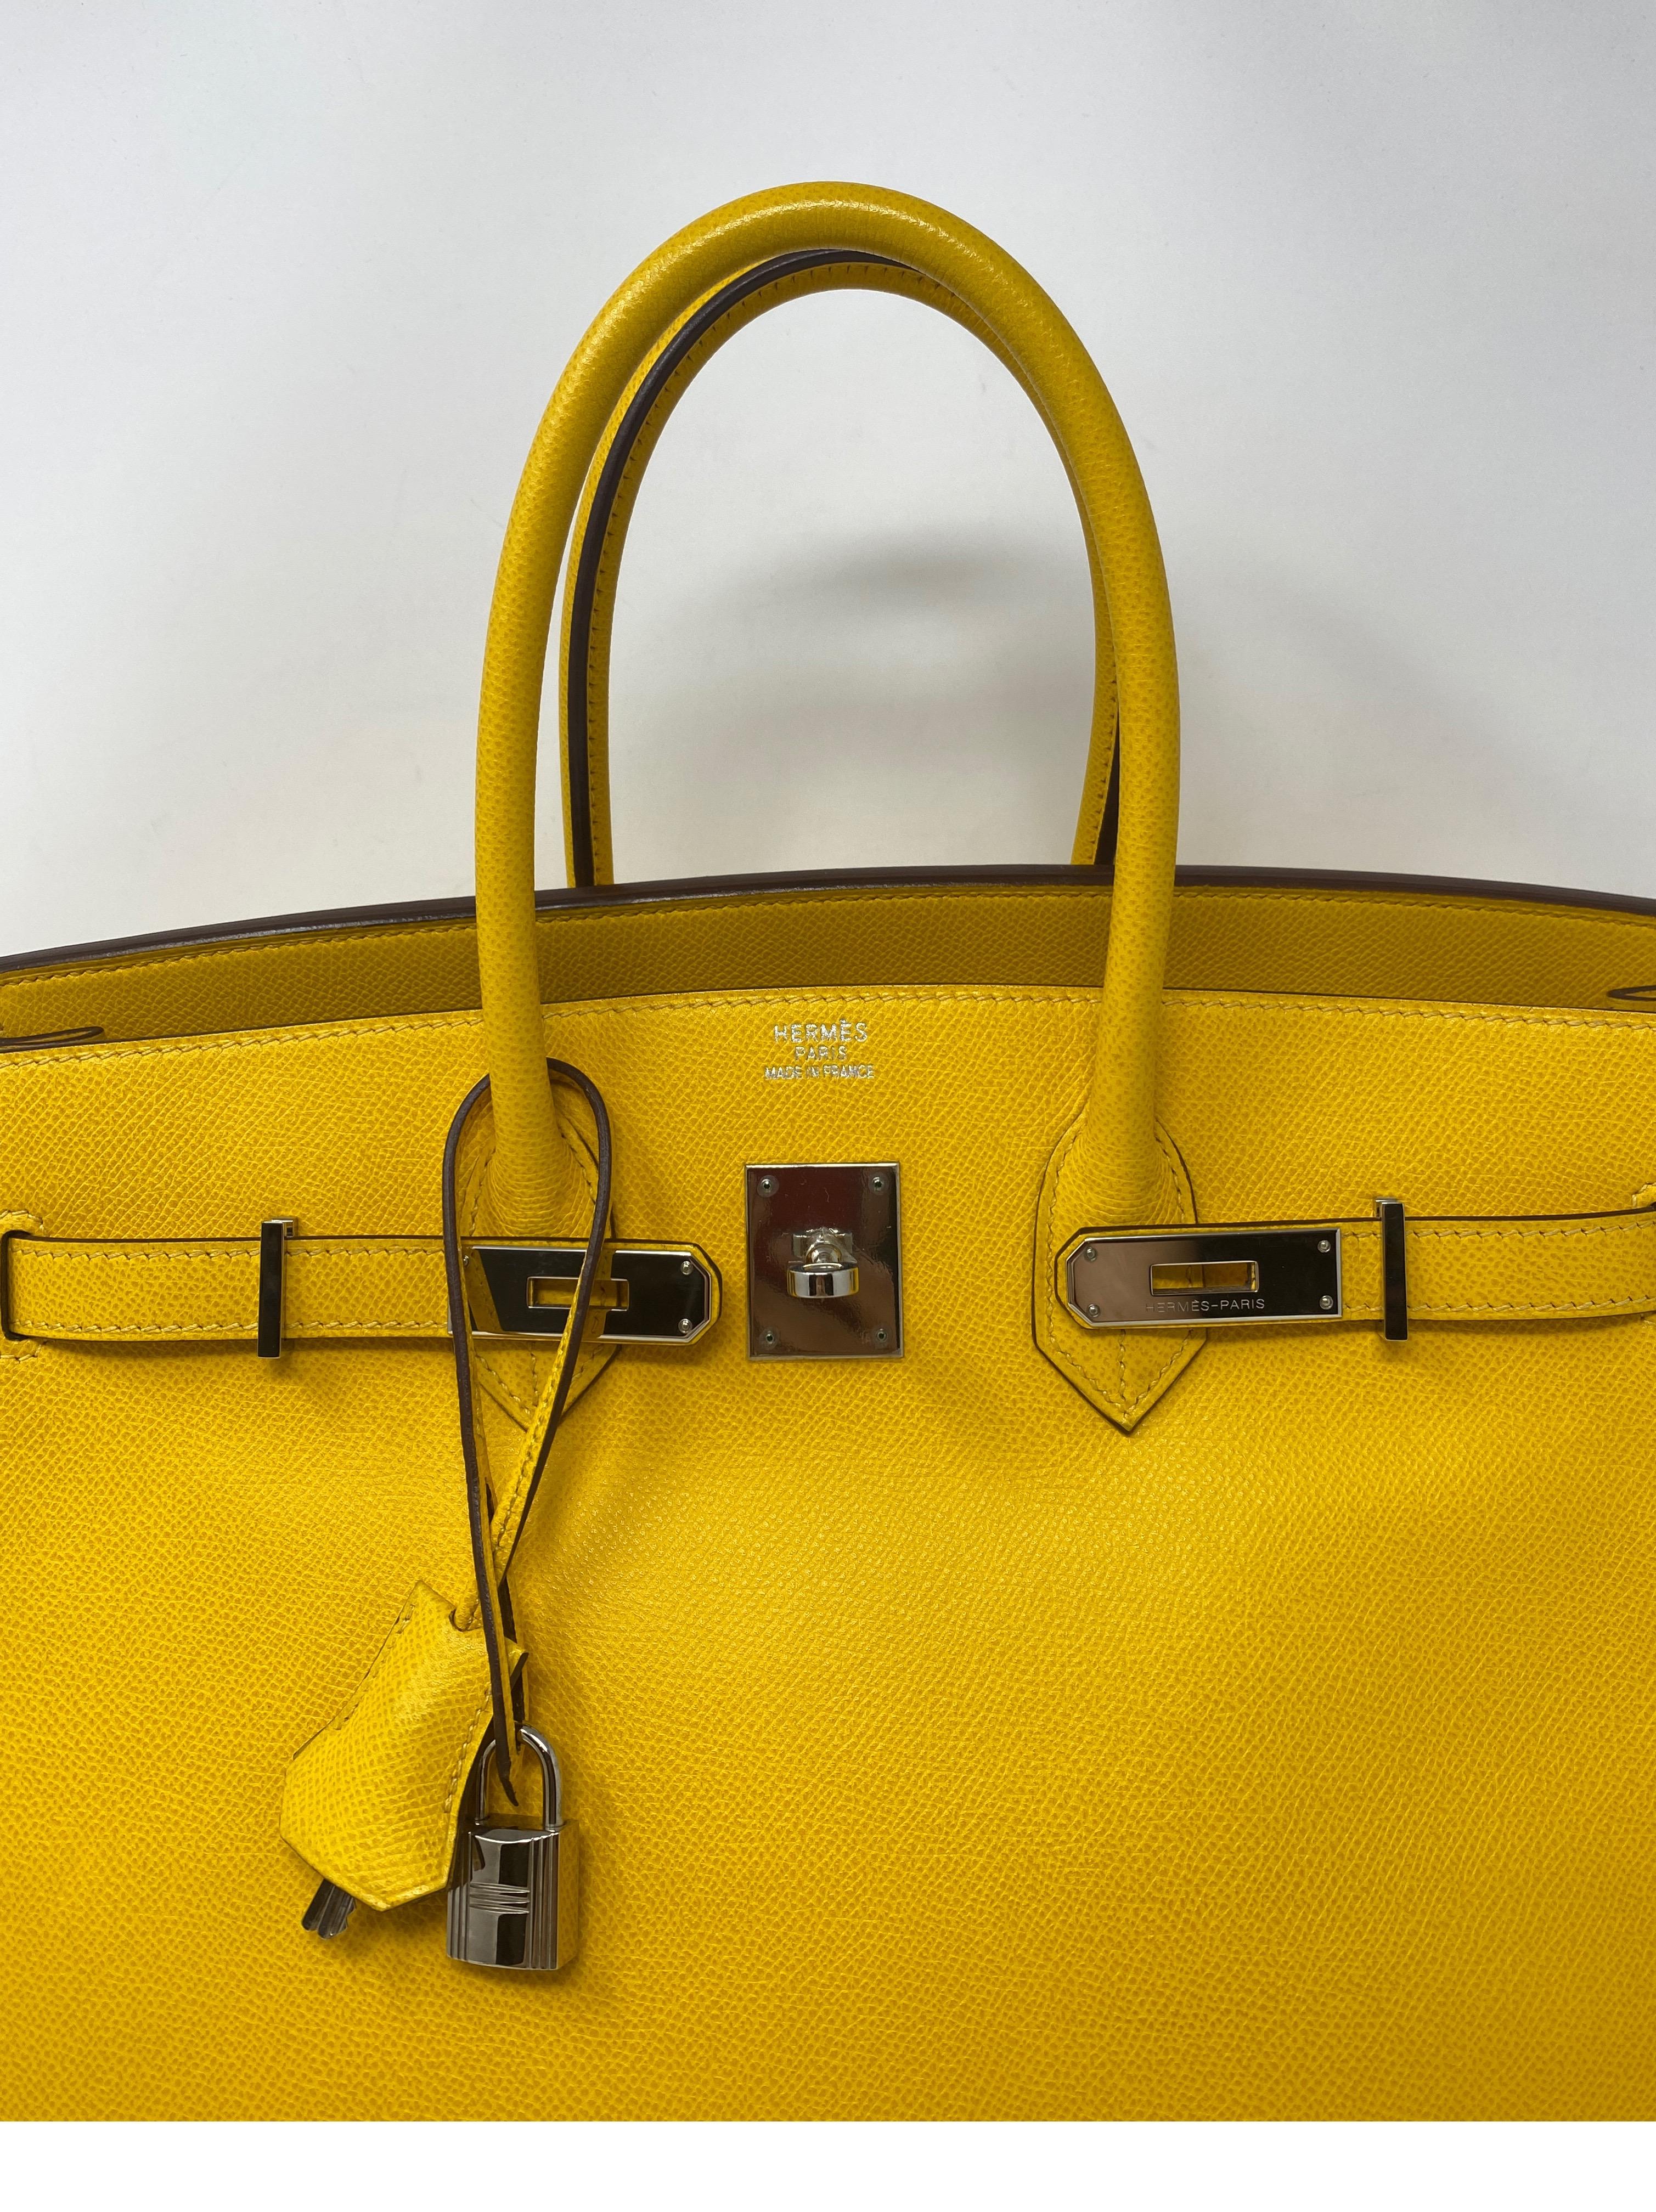 Hermes Birkin Jaune Yellow 35 Bag. Palladium hardware. Epsom leather. Mint condition. Like new condition. Beautiful bright yellow color. From 2005. Includes clochette, lock, keys, and dust cover. Guaranteed authentic. 